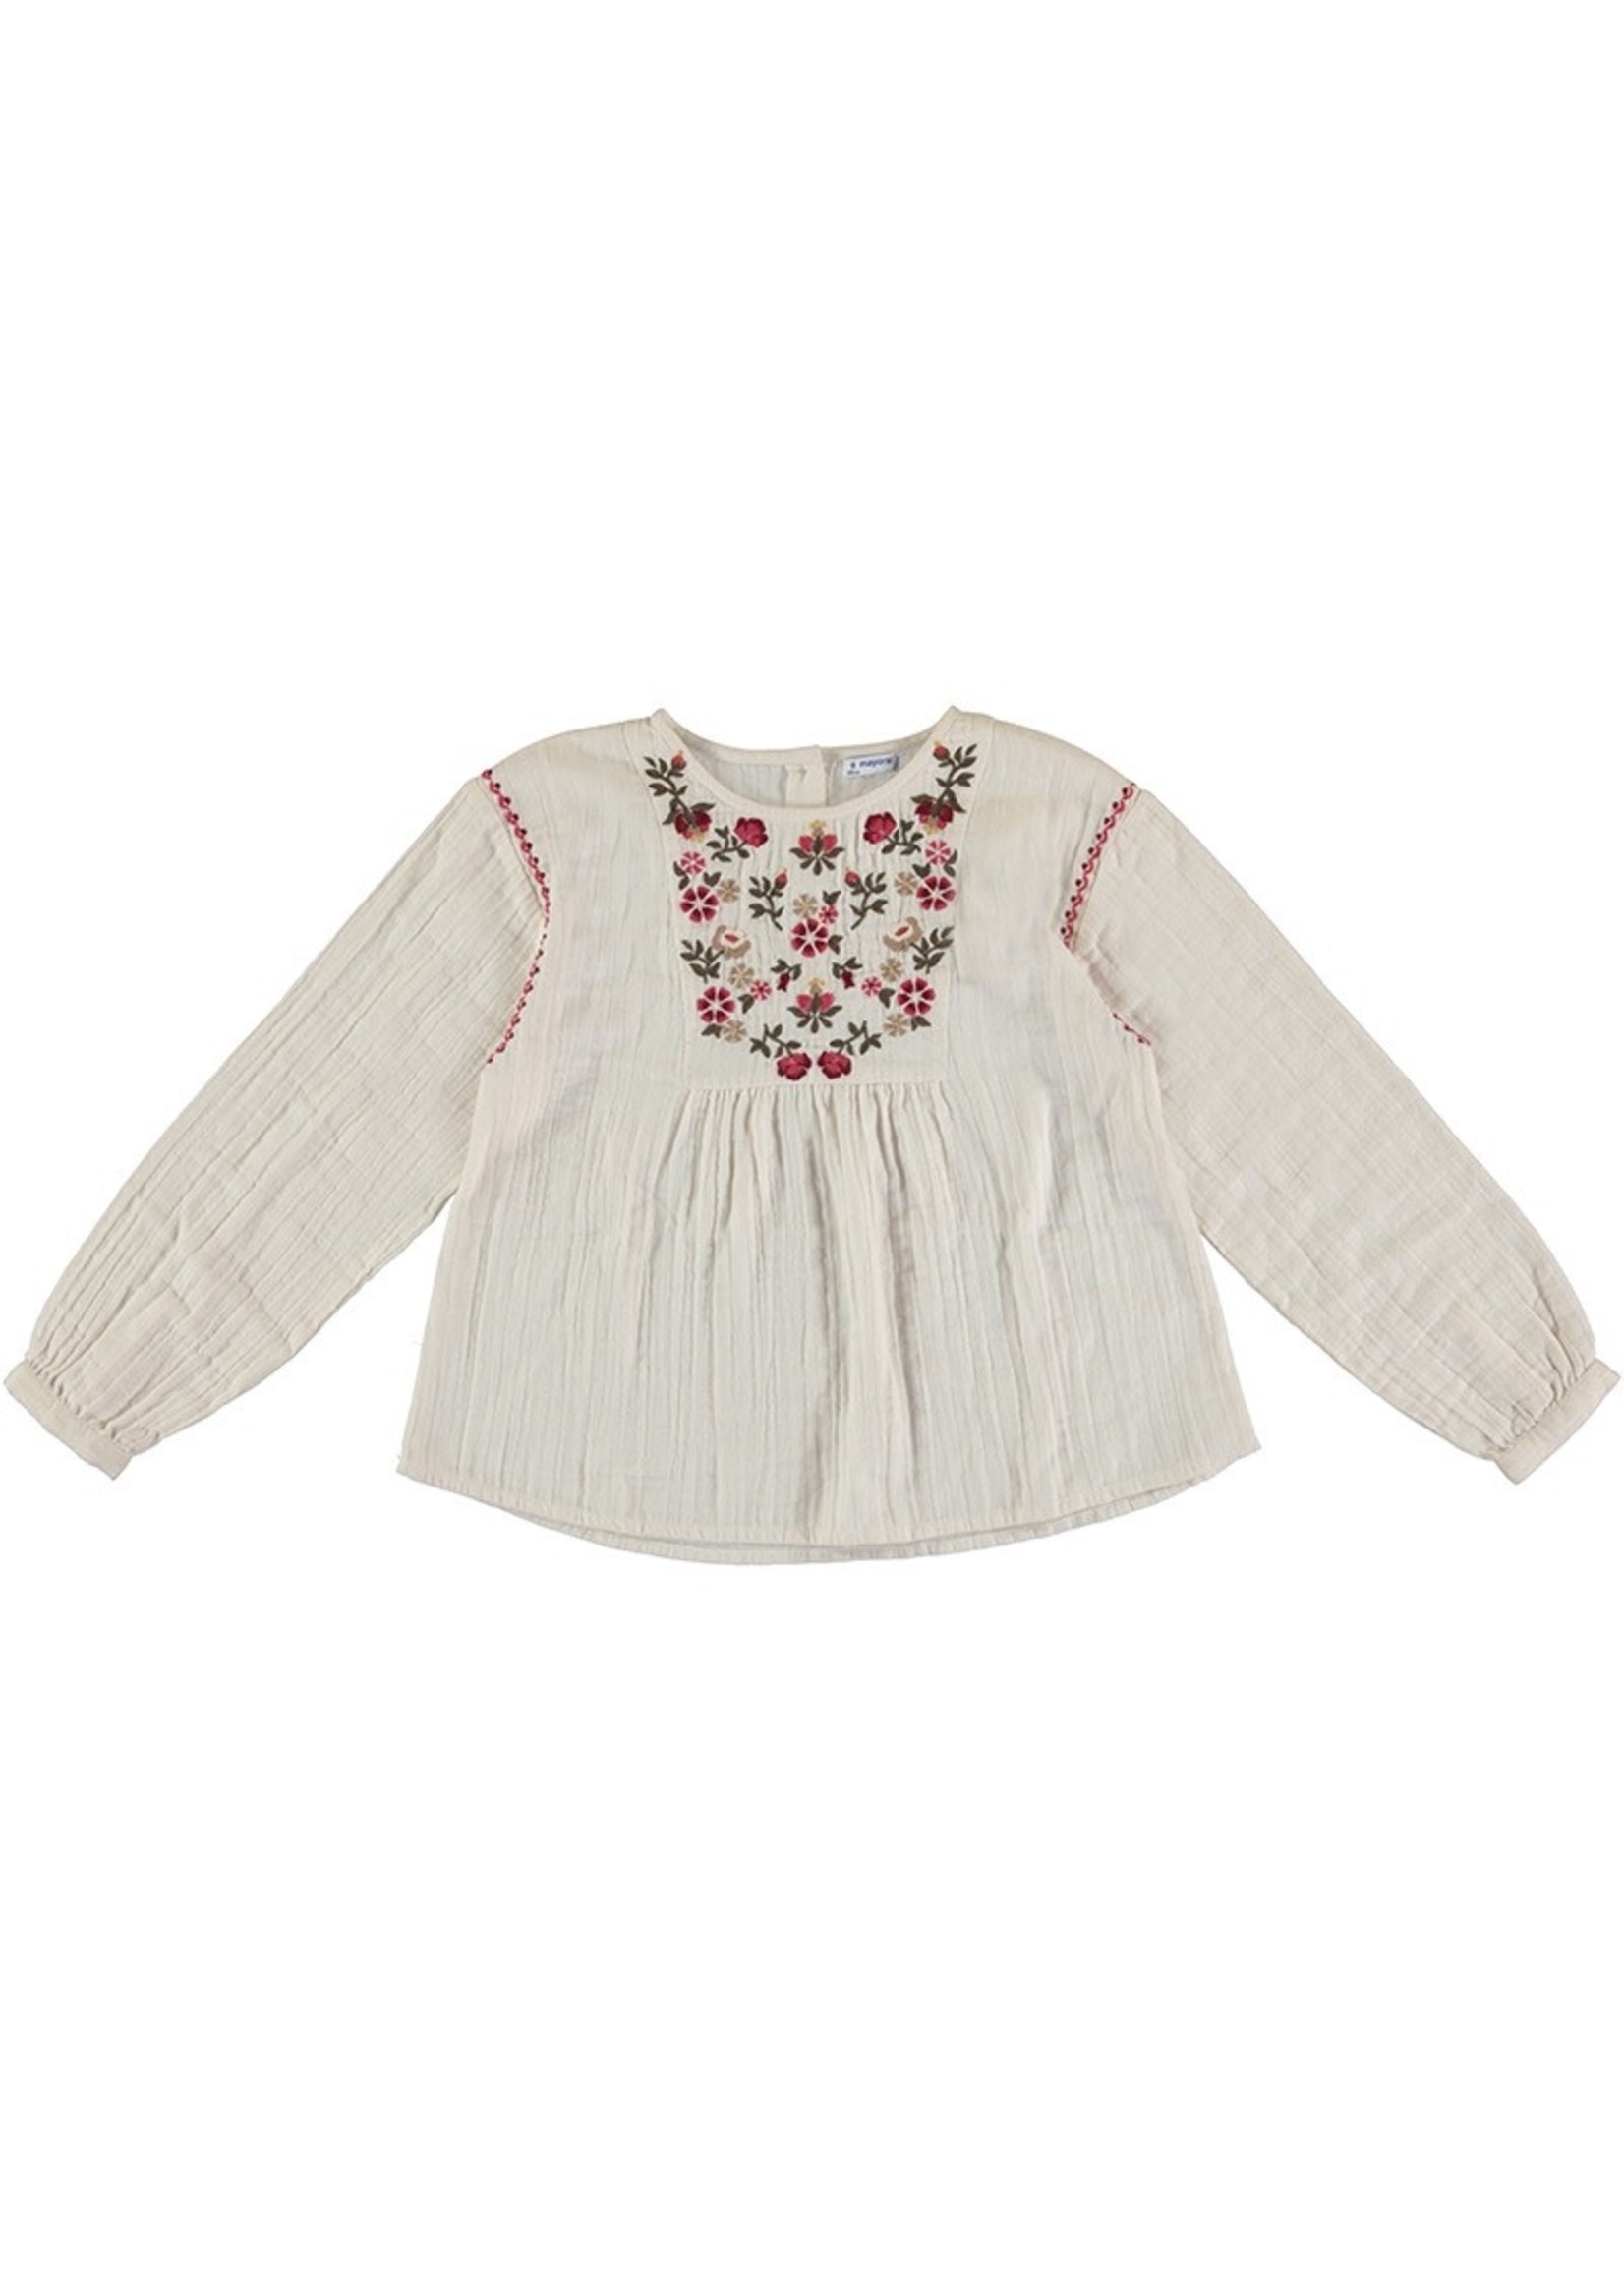 Mayoral Tan Floral Embroidered Blouse